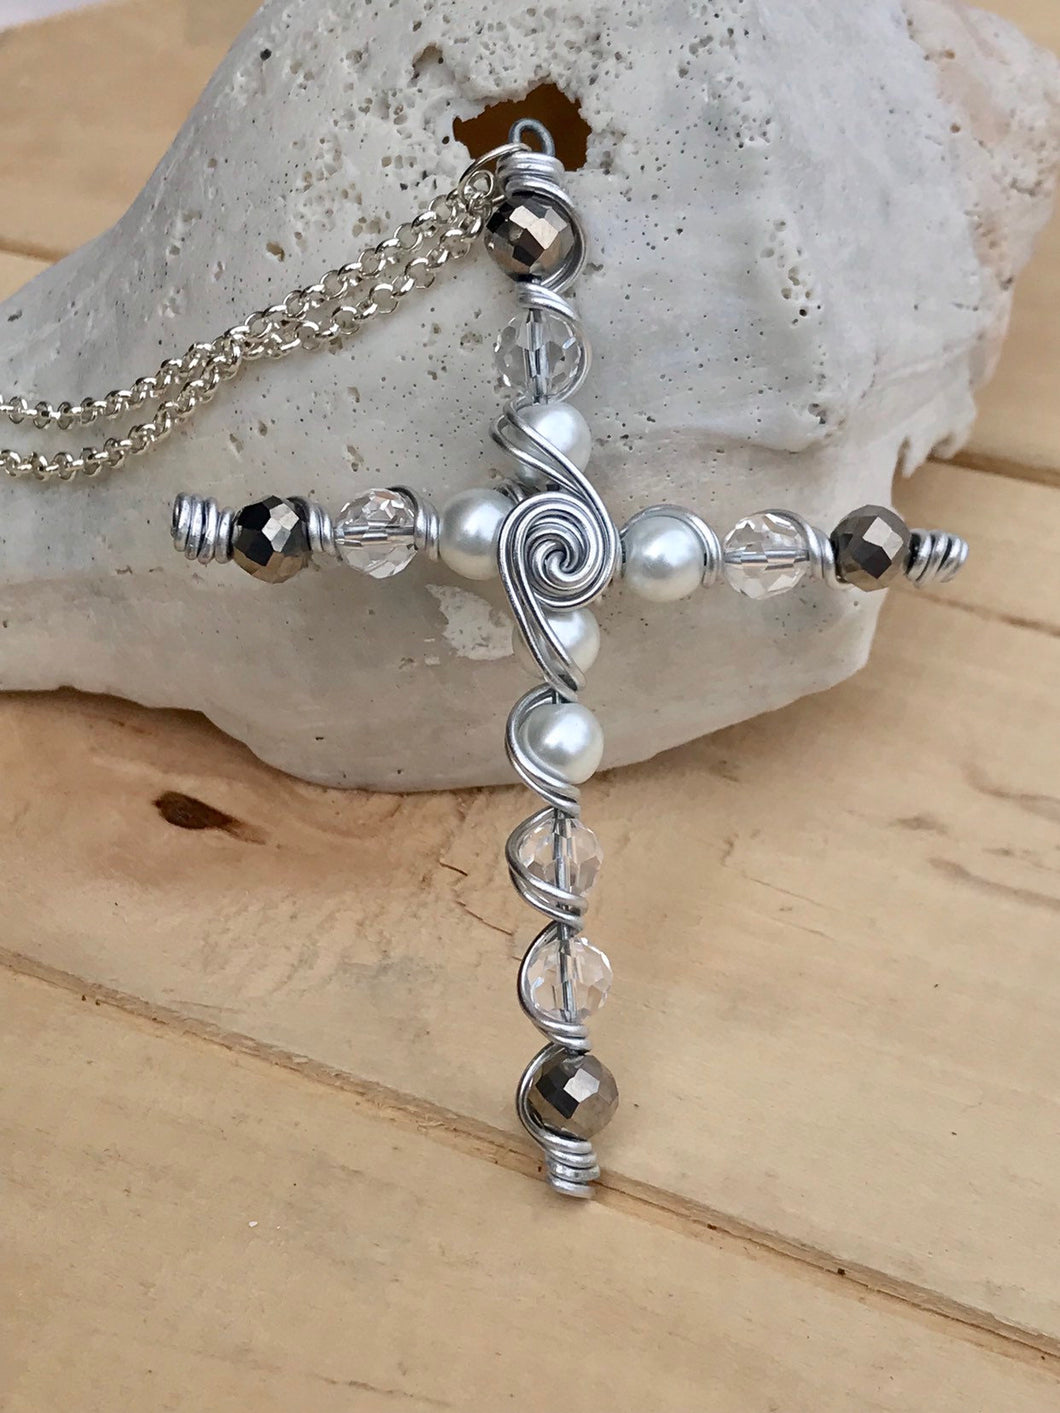 Decorative Large White Pearl and Silver Beaded Cross Necklace